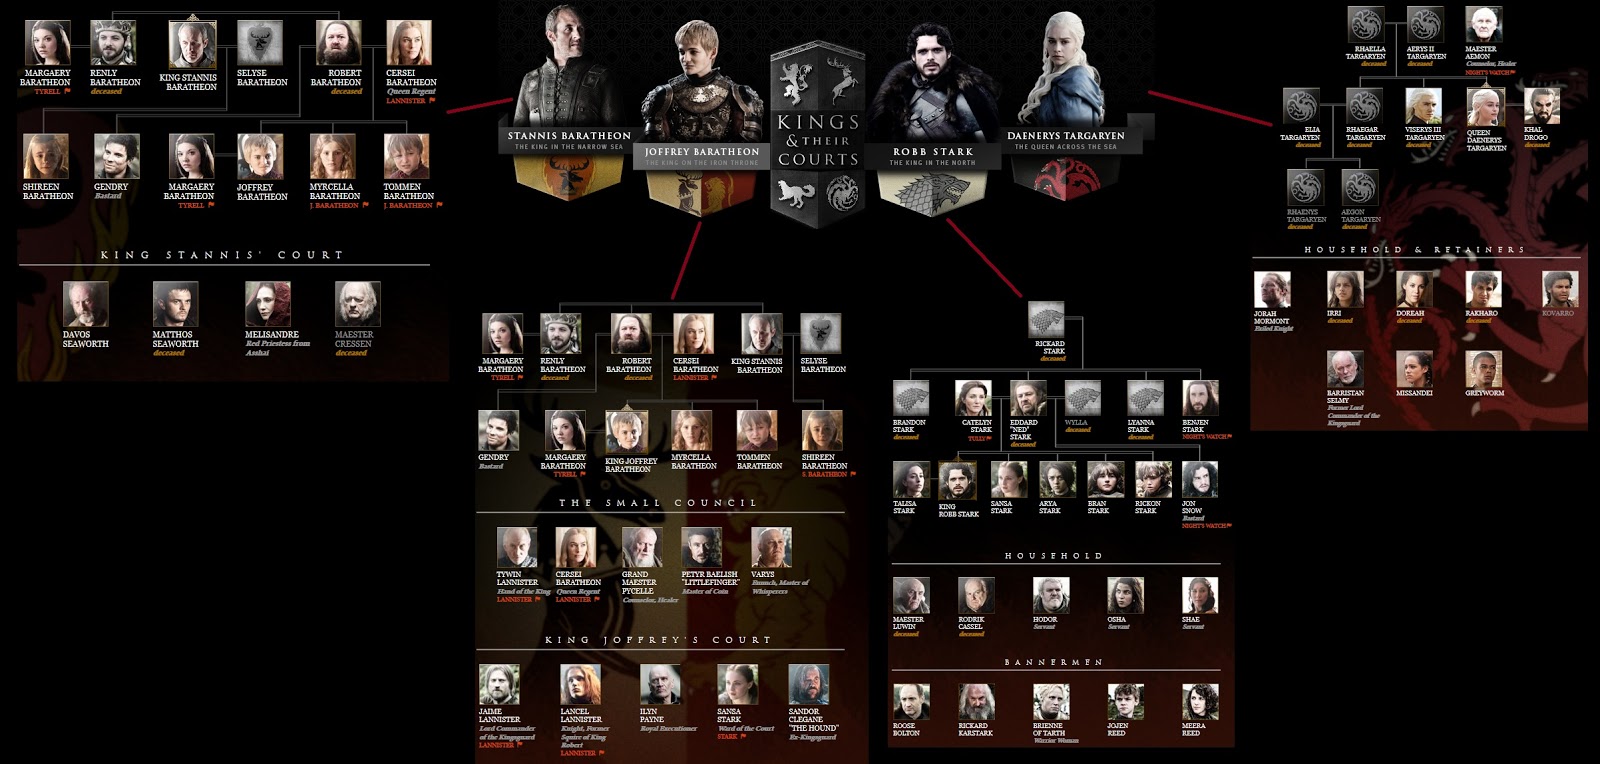 Game of Thrones: Kings, Queens and their Courts | Game of thrones king, Jon snow family tree